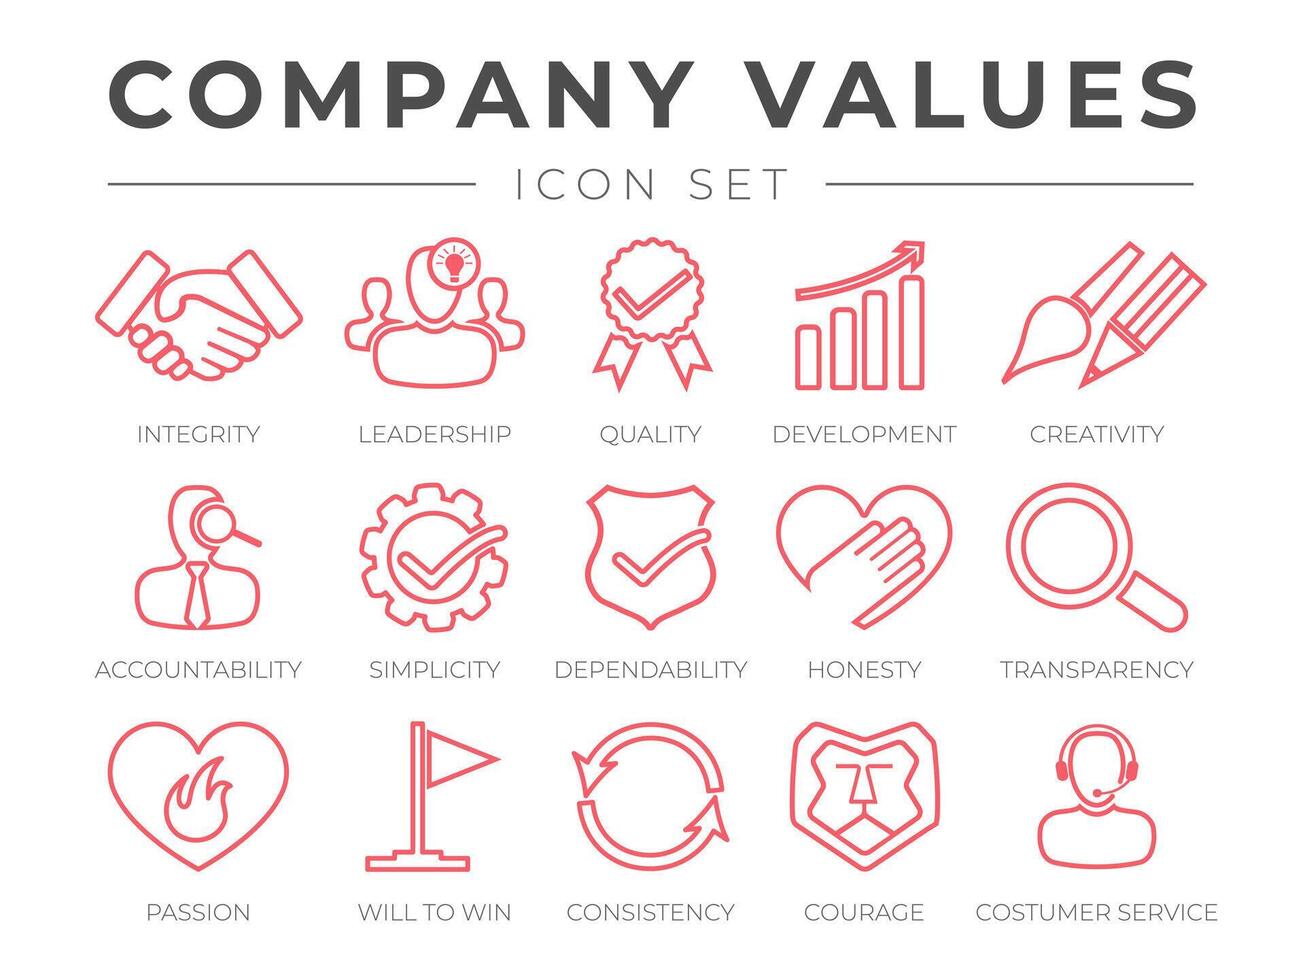 Company Core Values Outline Icon Set. Integrity, Leadership, Quality and Development, Creativity, Accountability, Simplicity, Dependability, Honesty, Transparency, Passion, Will to win, Icons. vector